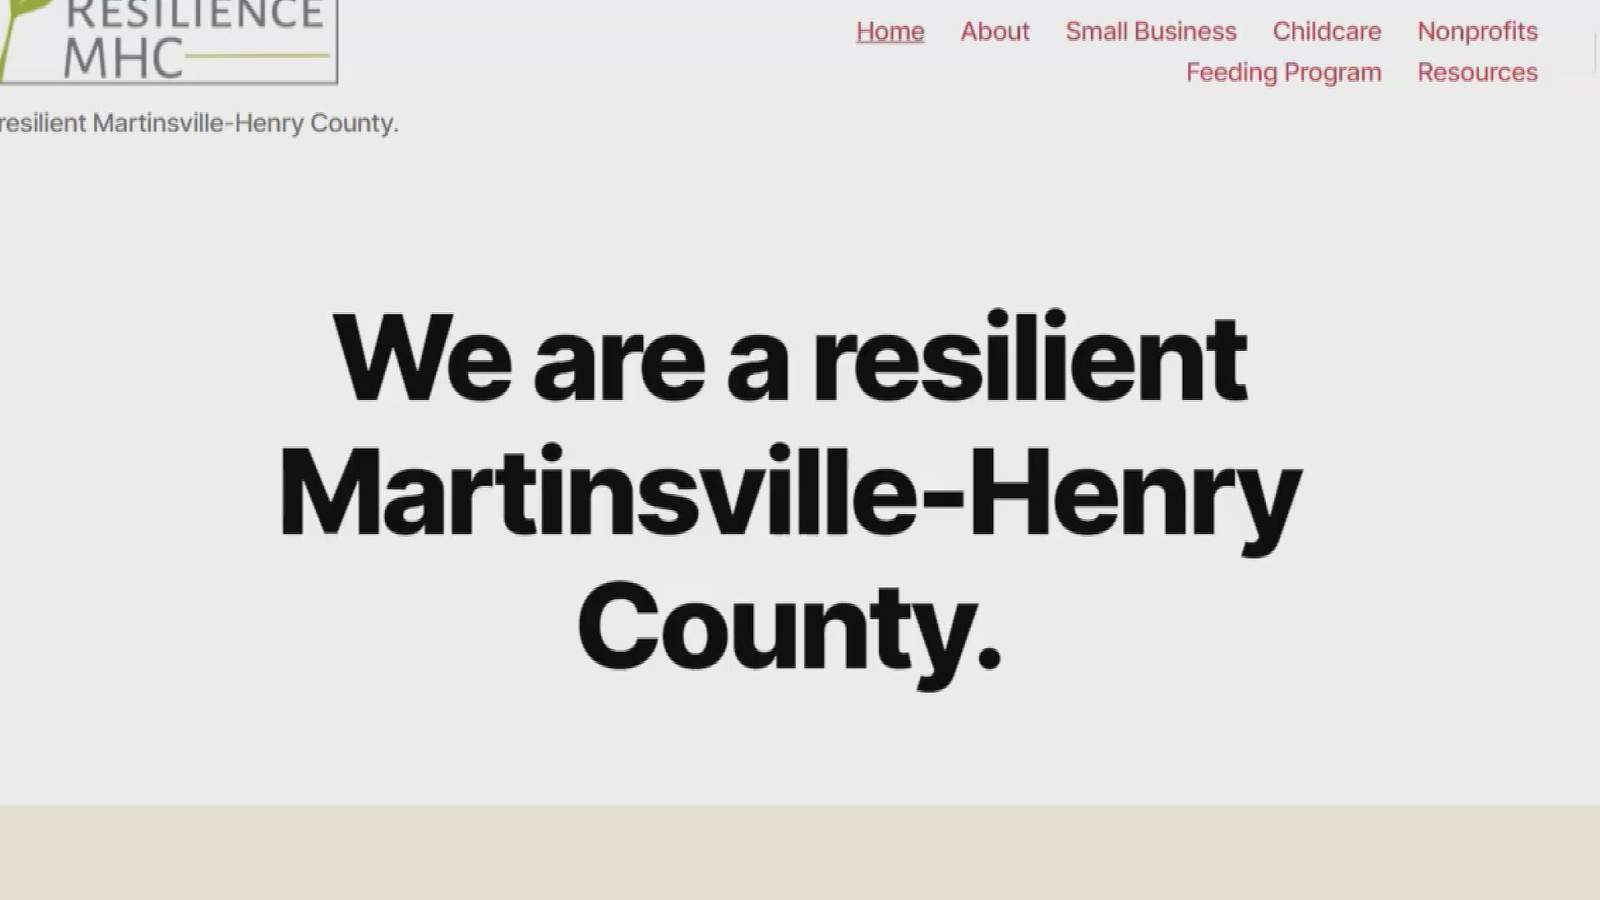 Website created to help with child care needs in Martinsville, Henry County